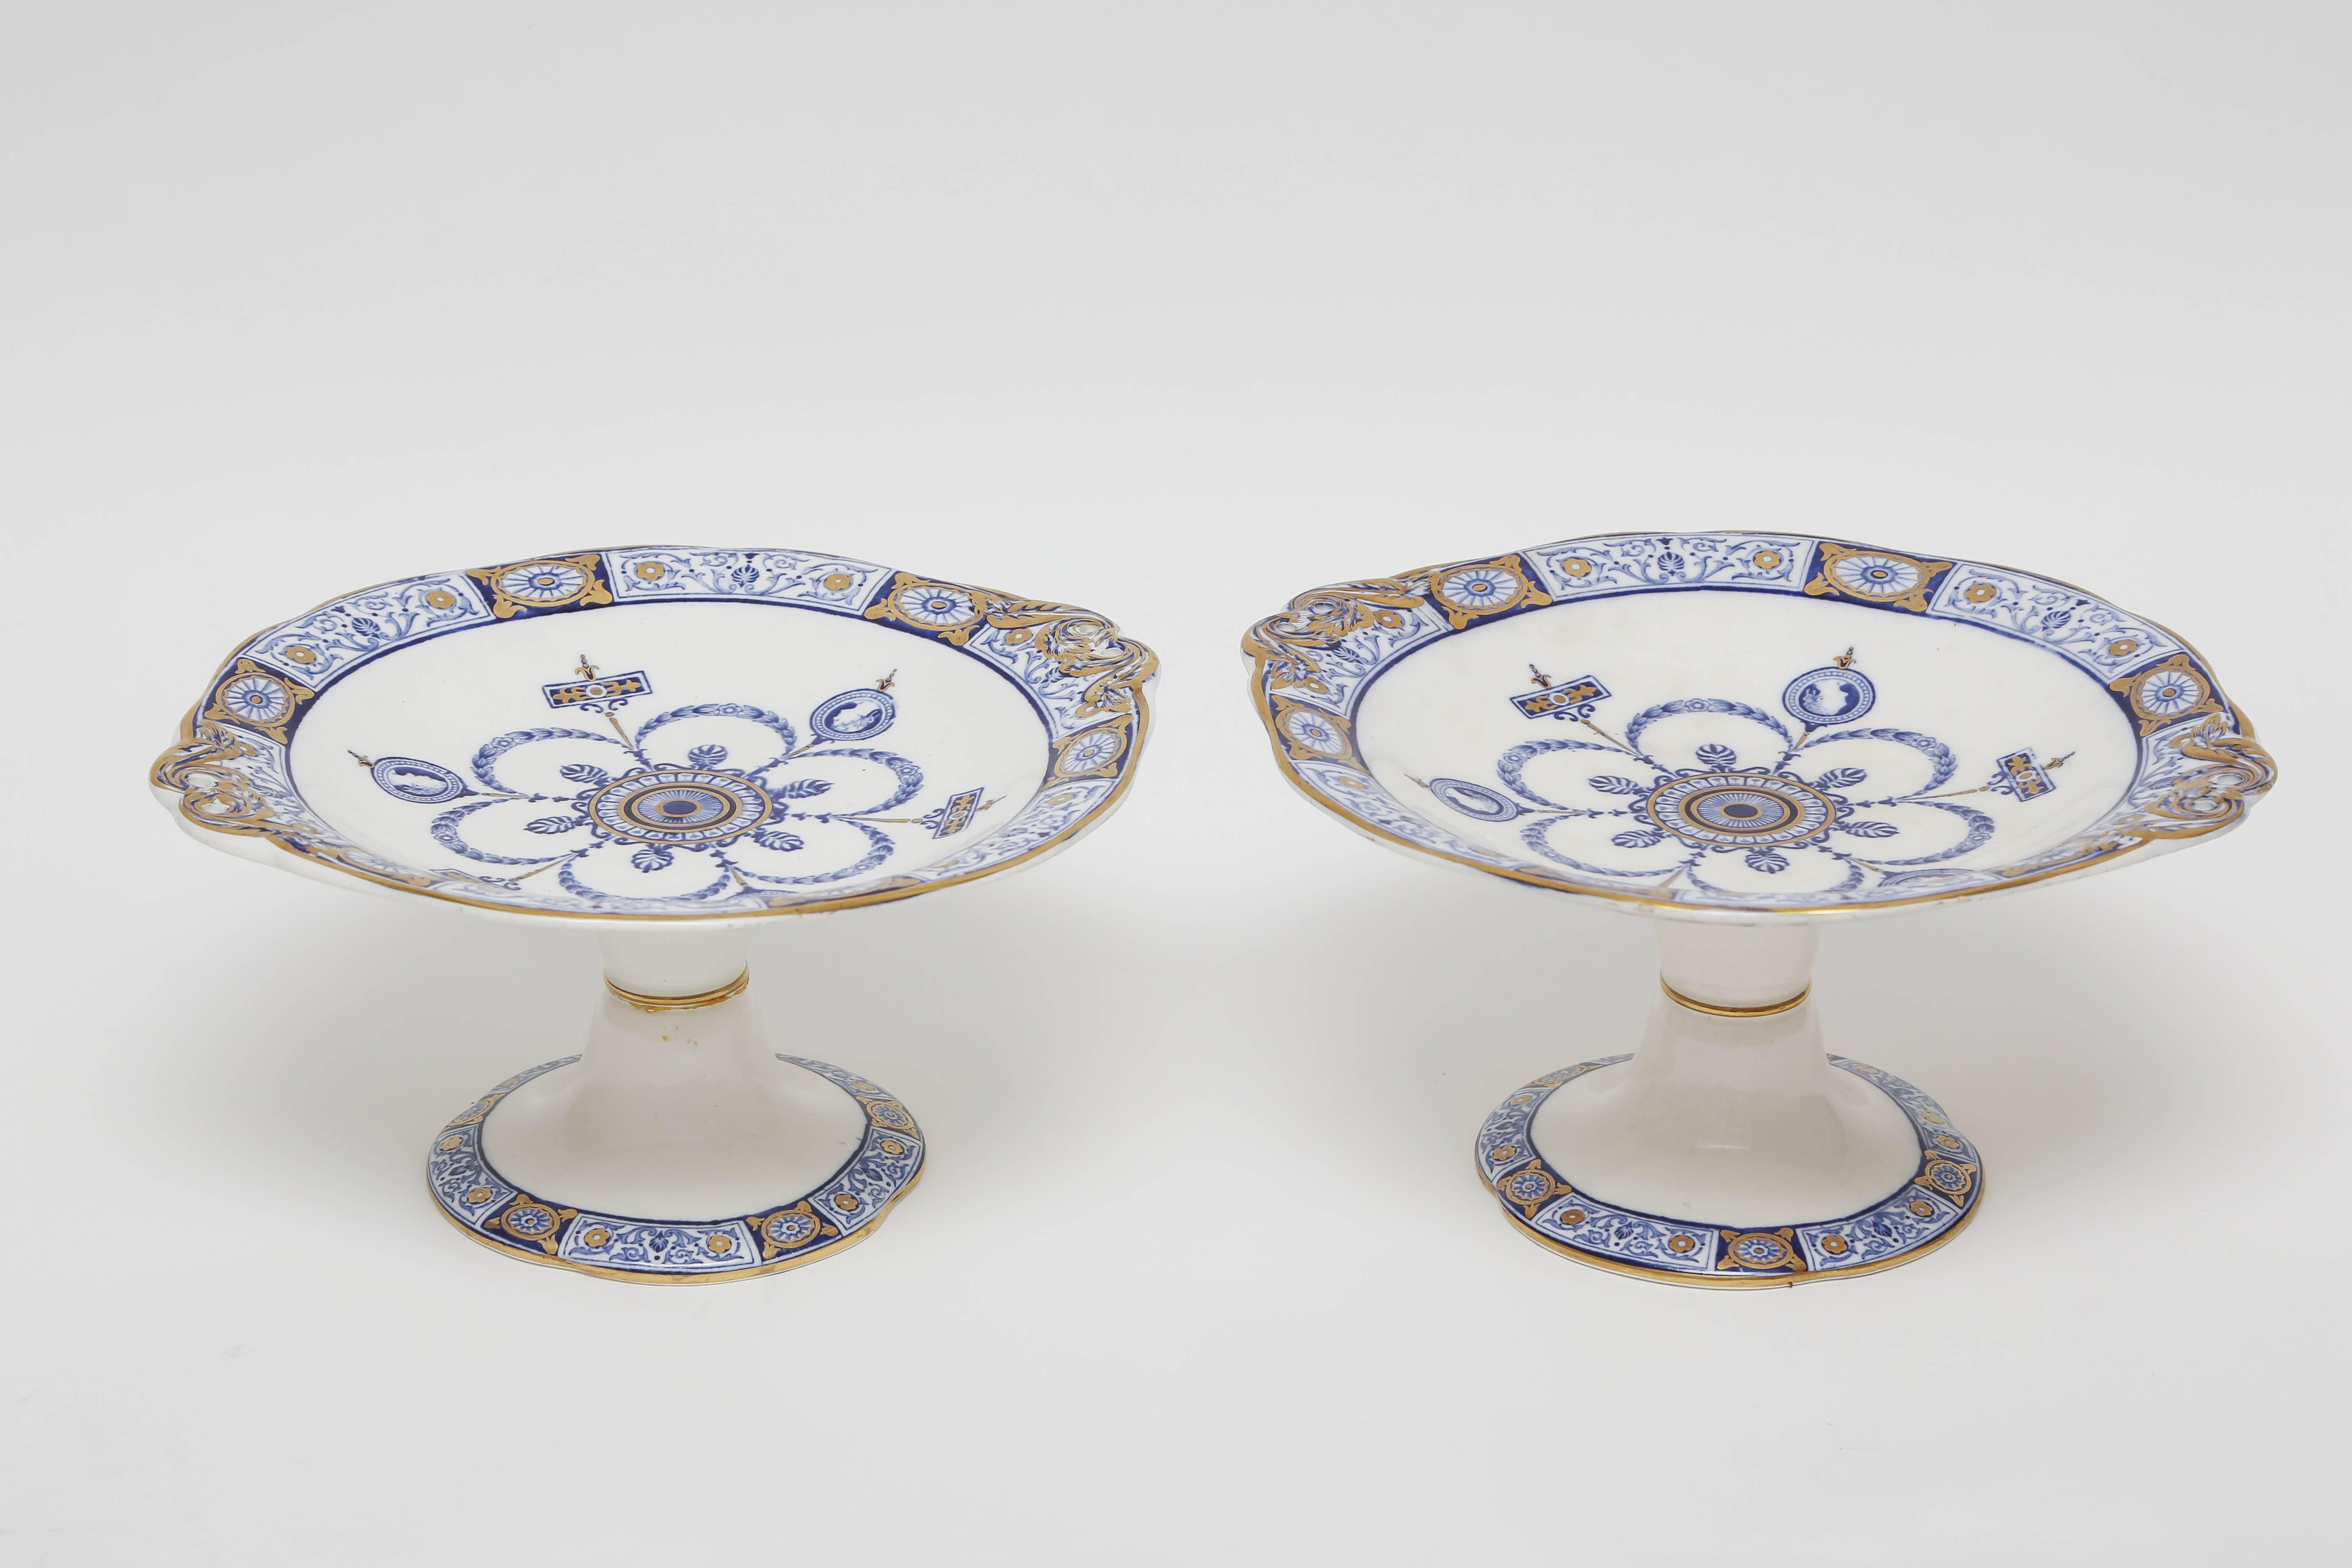 A Classic and elegant pair of tall pedestal based fruit or dessert compotes in a striking blue and white pattern. This design features figural Greco Roman portraits and an Aesthetic Movement central medallion. Hand gilt in 24-karat and in very nice